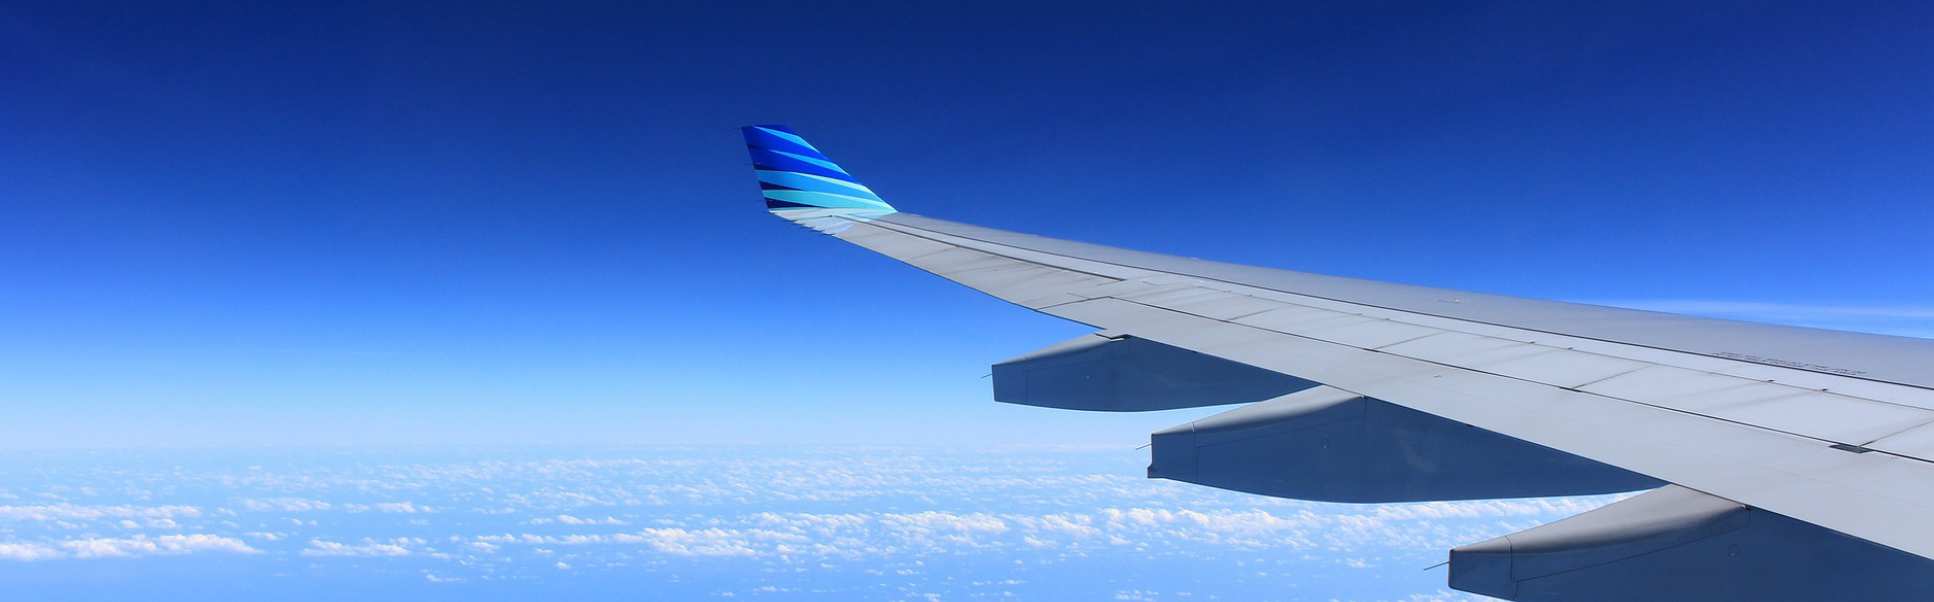 An airplane wing